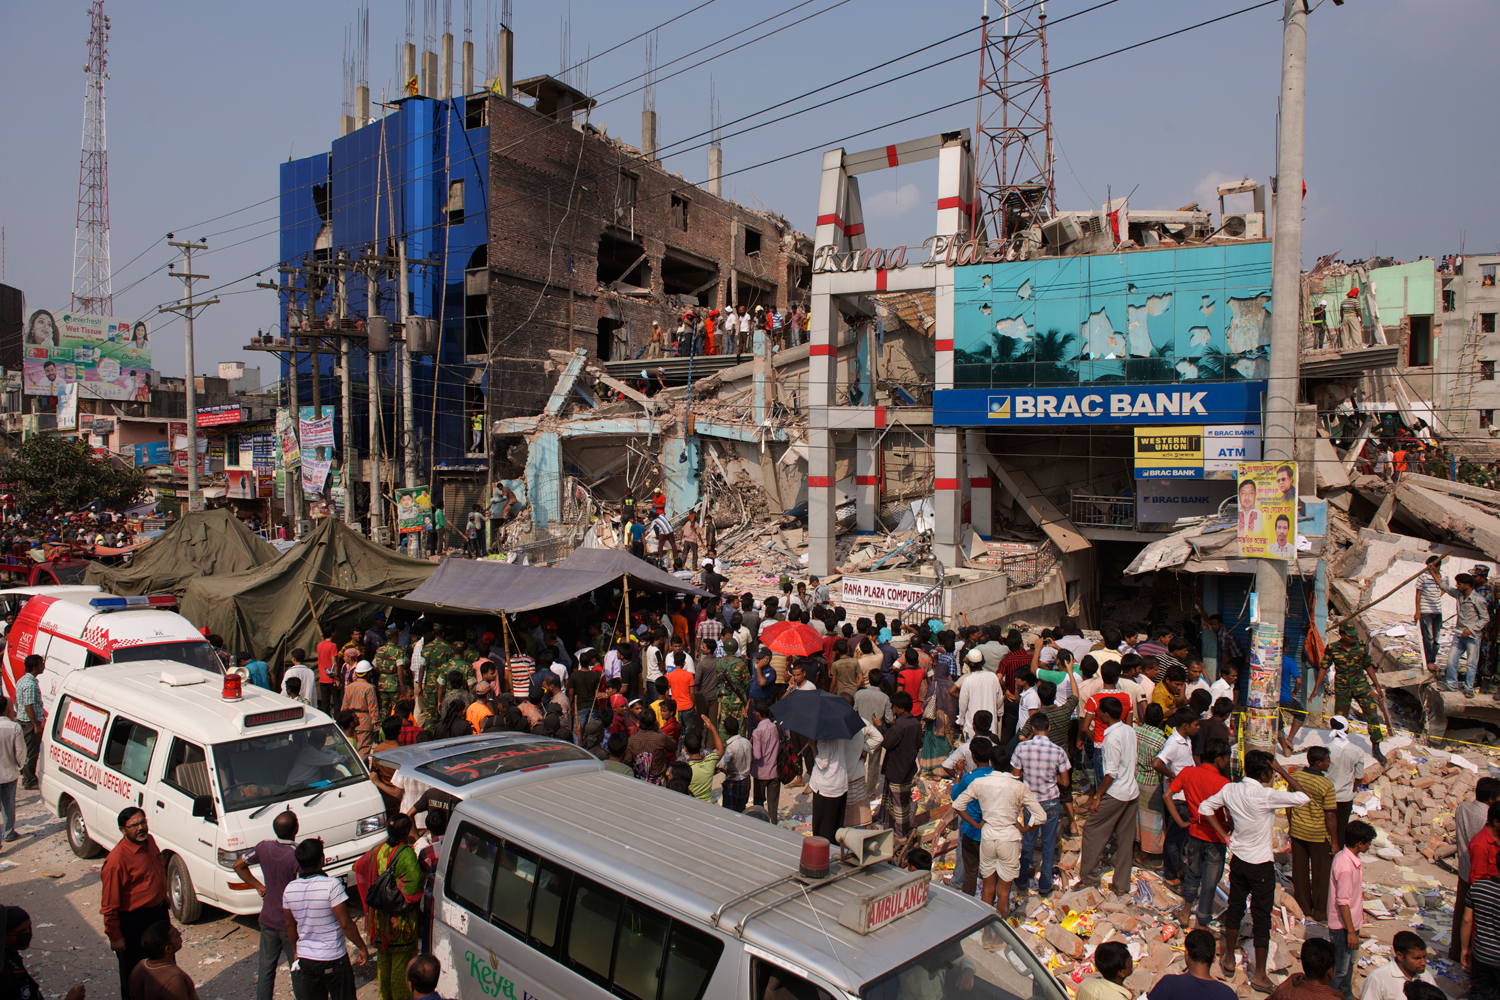 The emergency response following the devastating collapse of the Rana Plaza garment factory in Dhaka, Bangladesh.